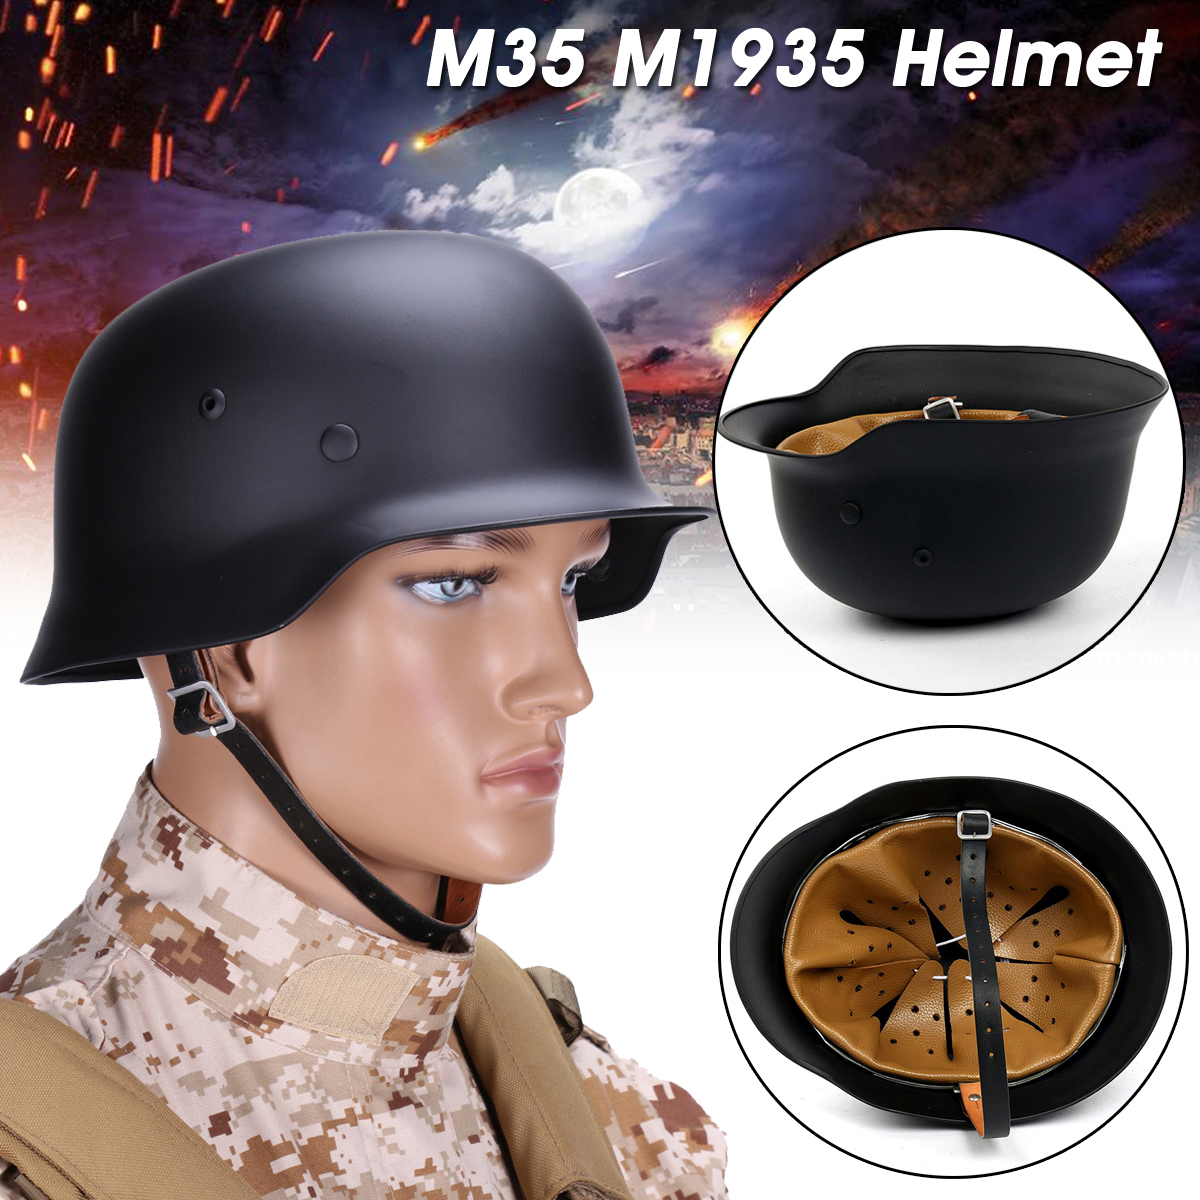 Black Army M35 M1935 Steel Helmet Video Props Cosplay Tools Collections - Auto GoShop